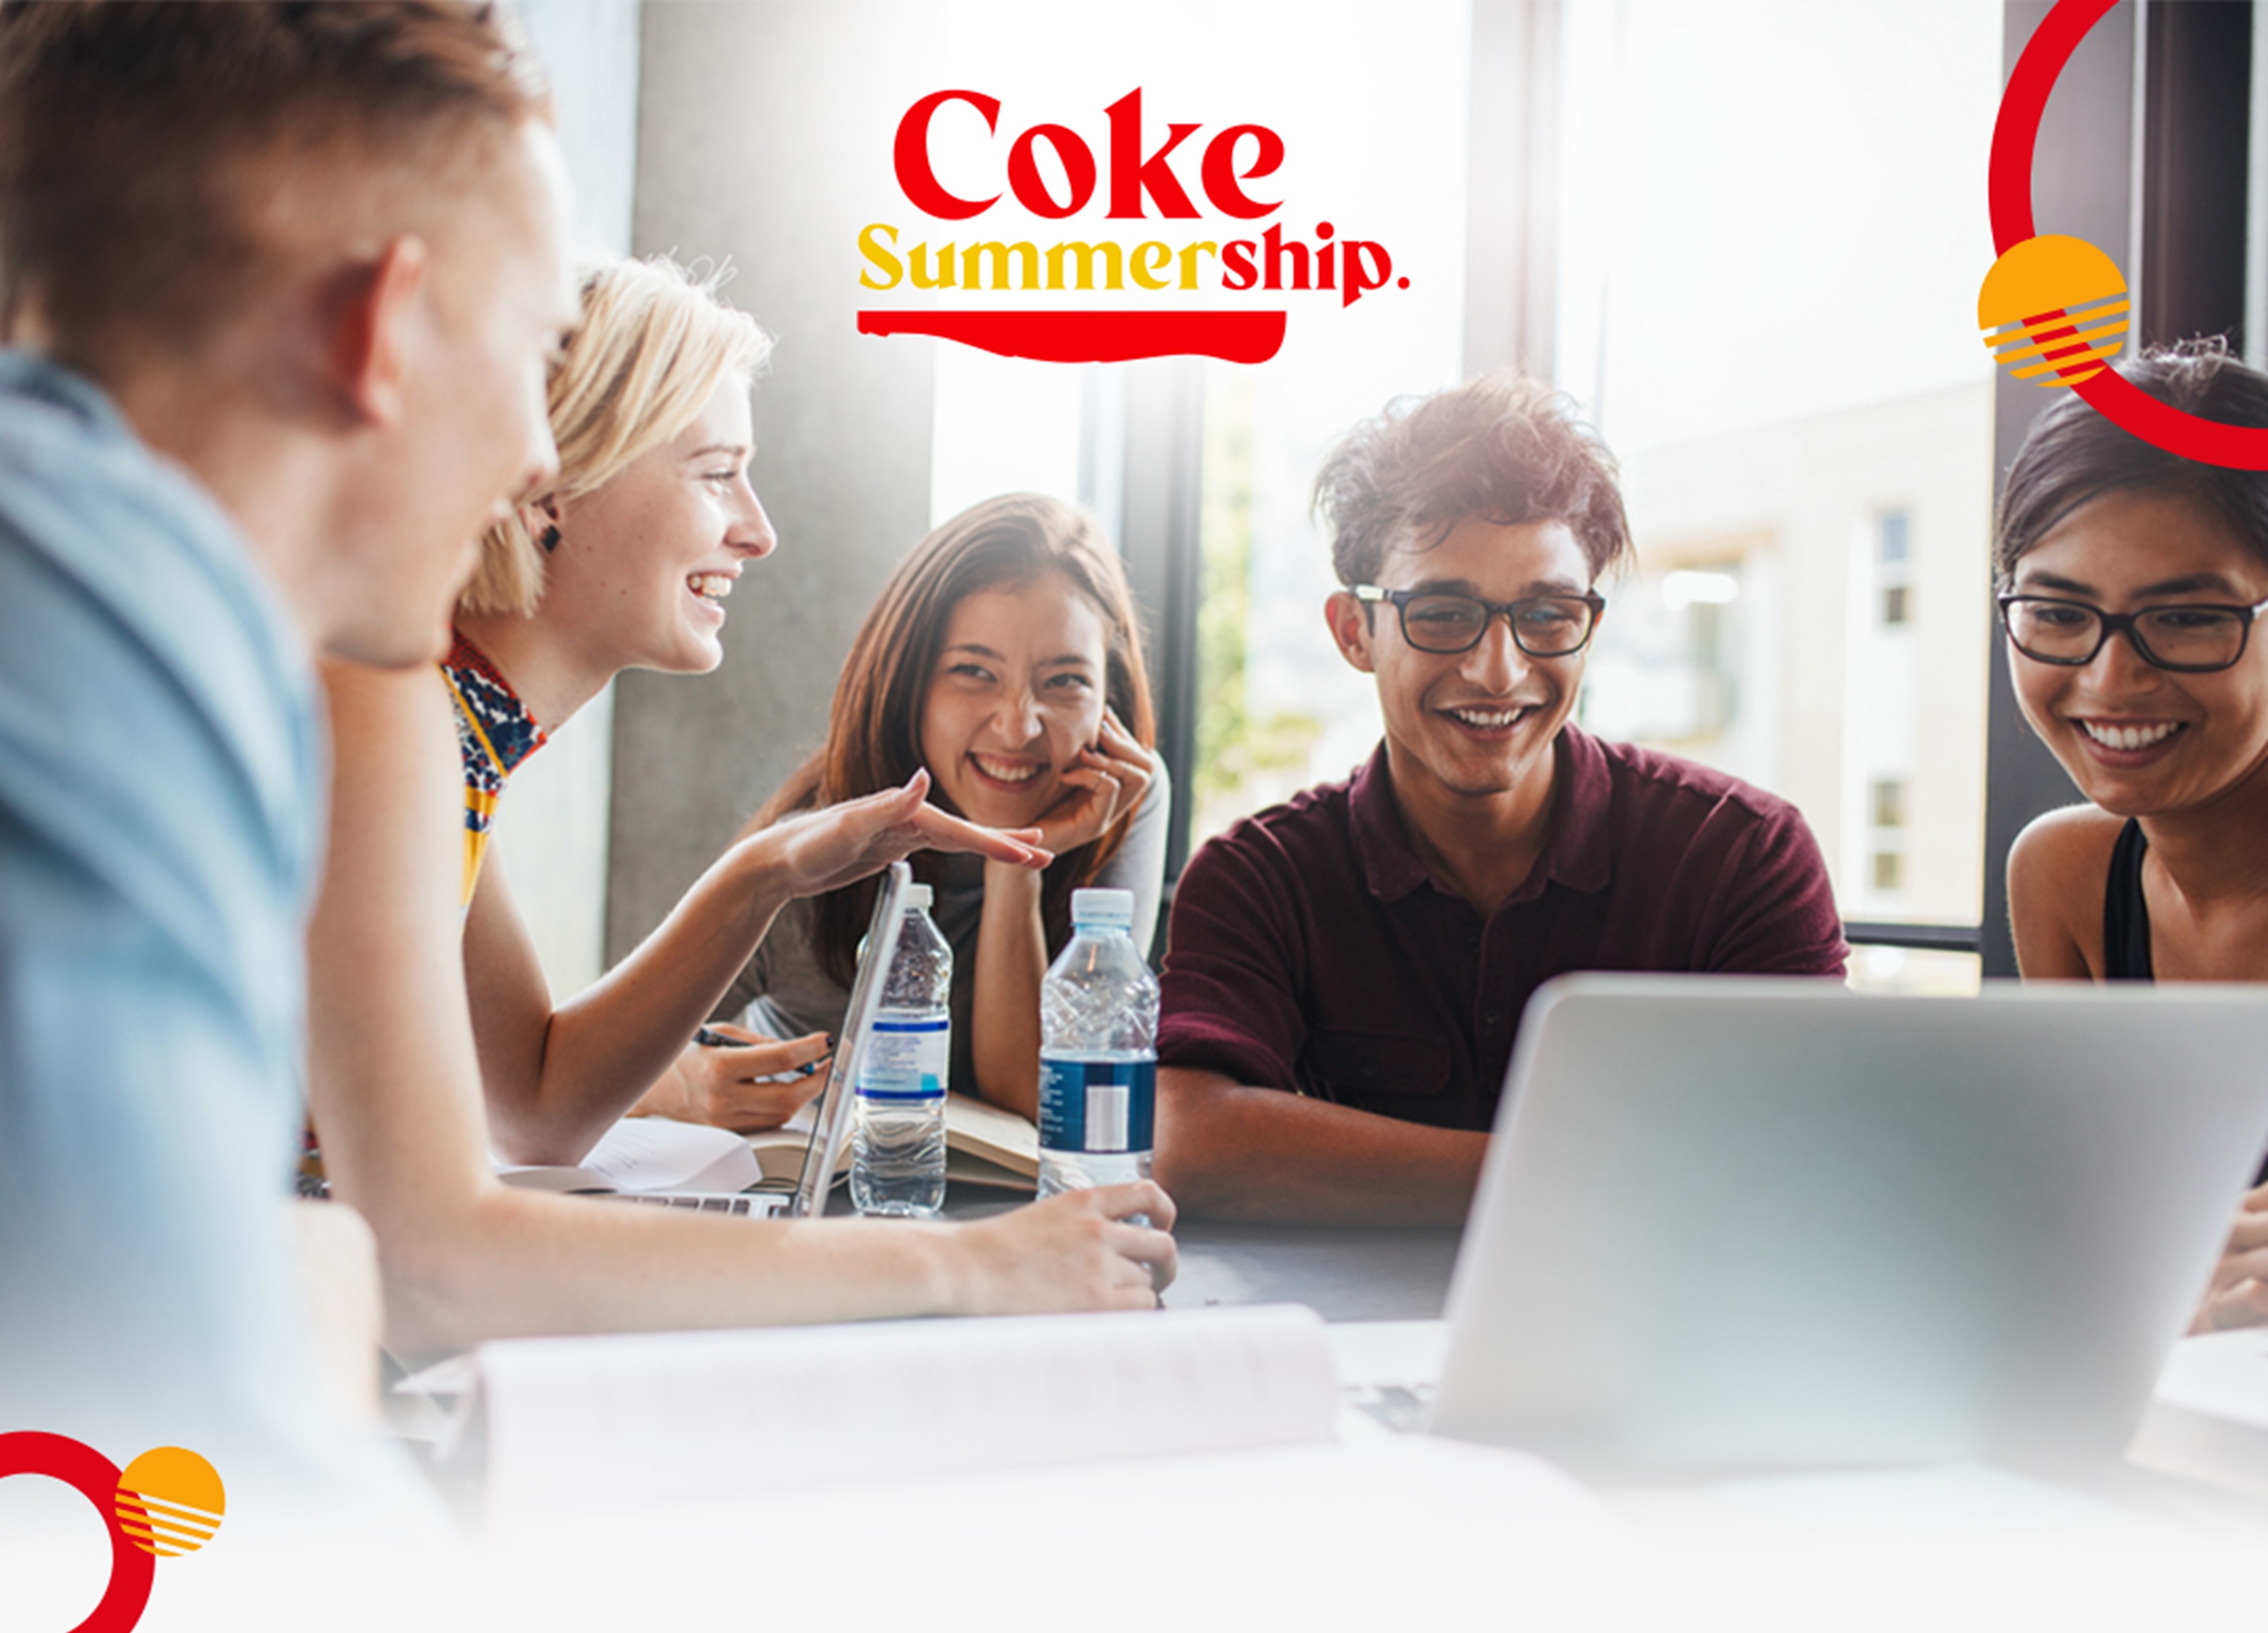 The application for the summer internship program of CocaCola HBC